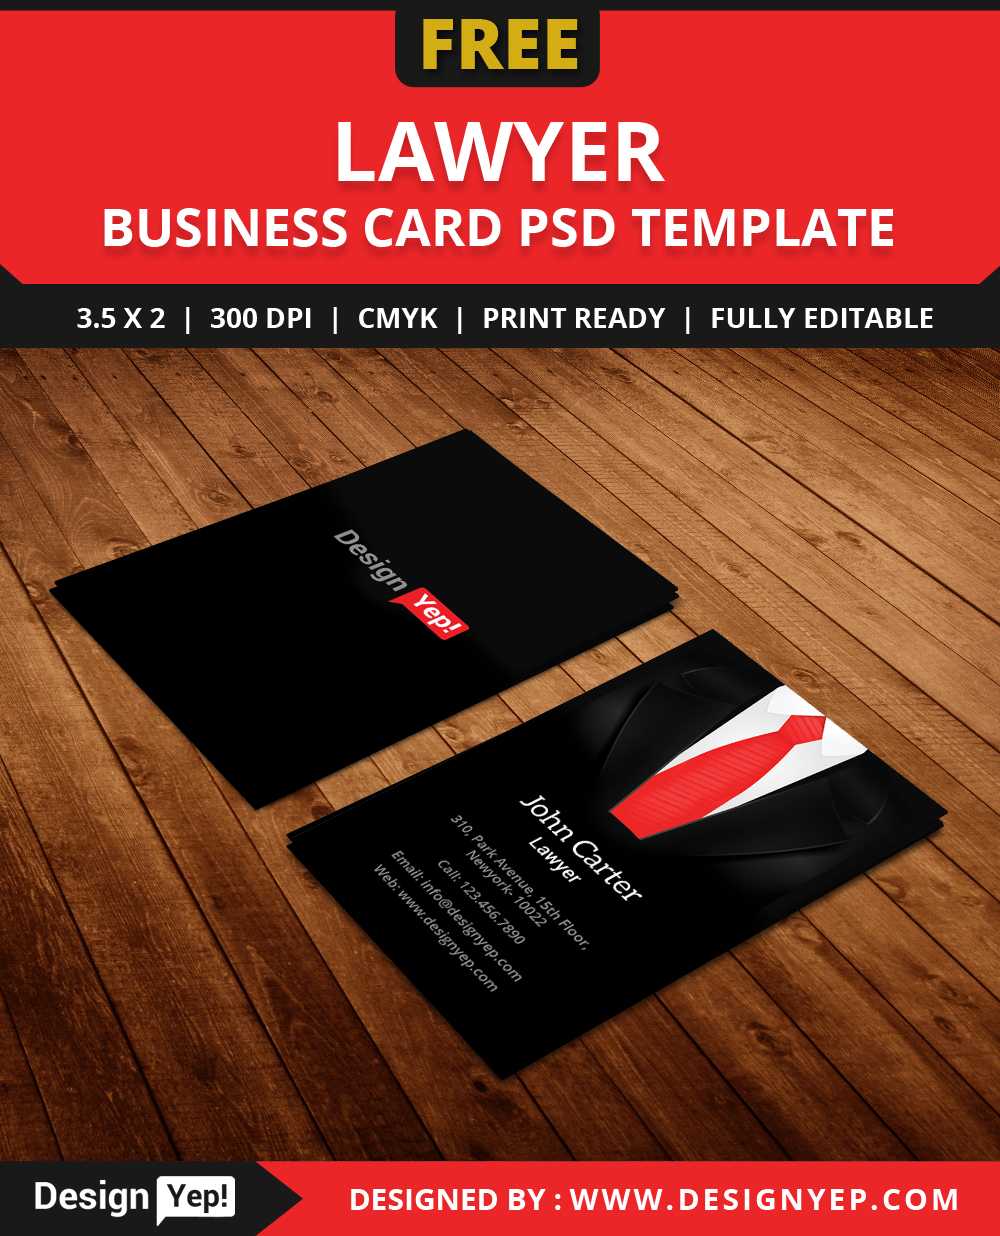 Free Lawyer Business Card Template Psd – Designyep Pertaining To Call Card Templates